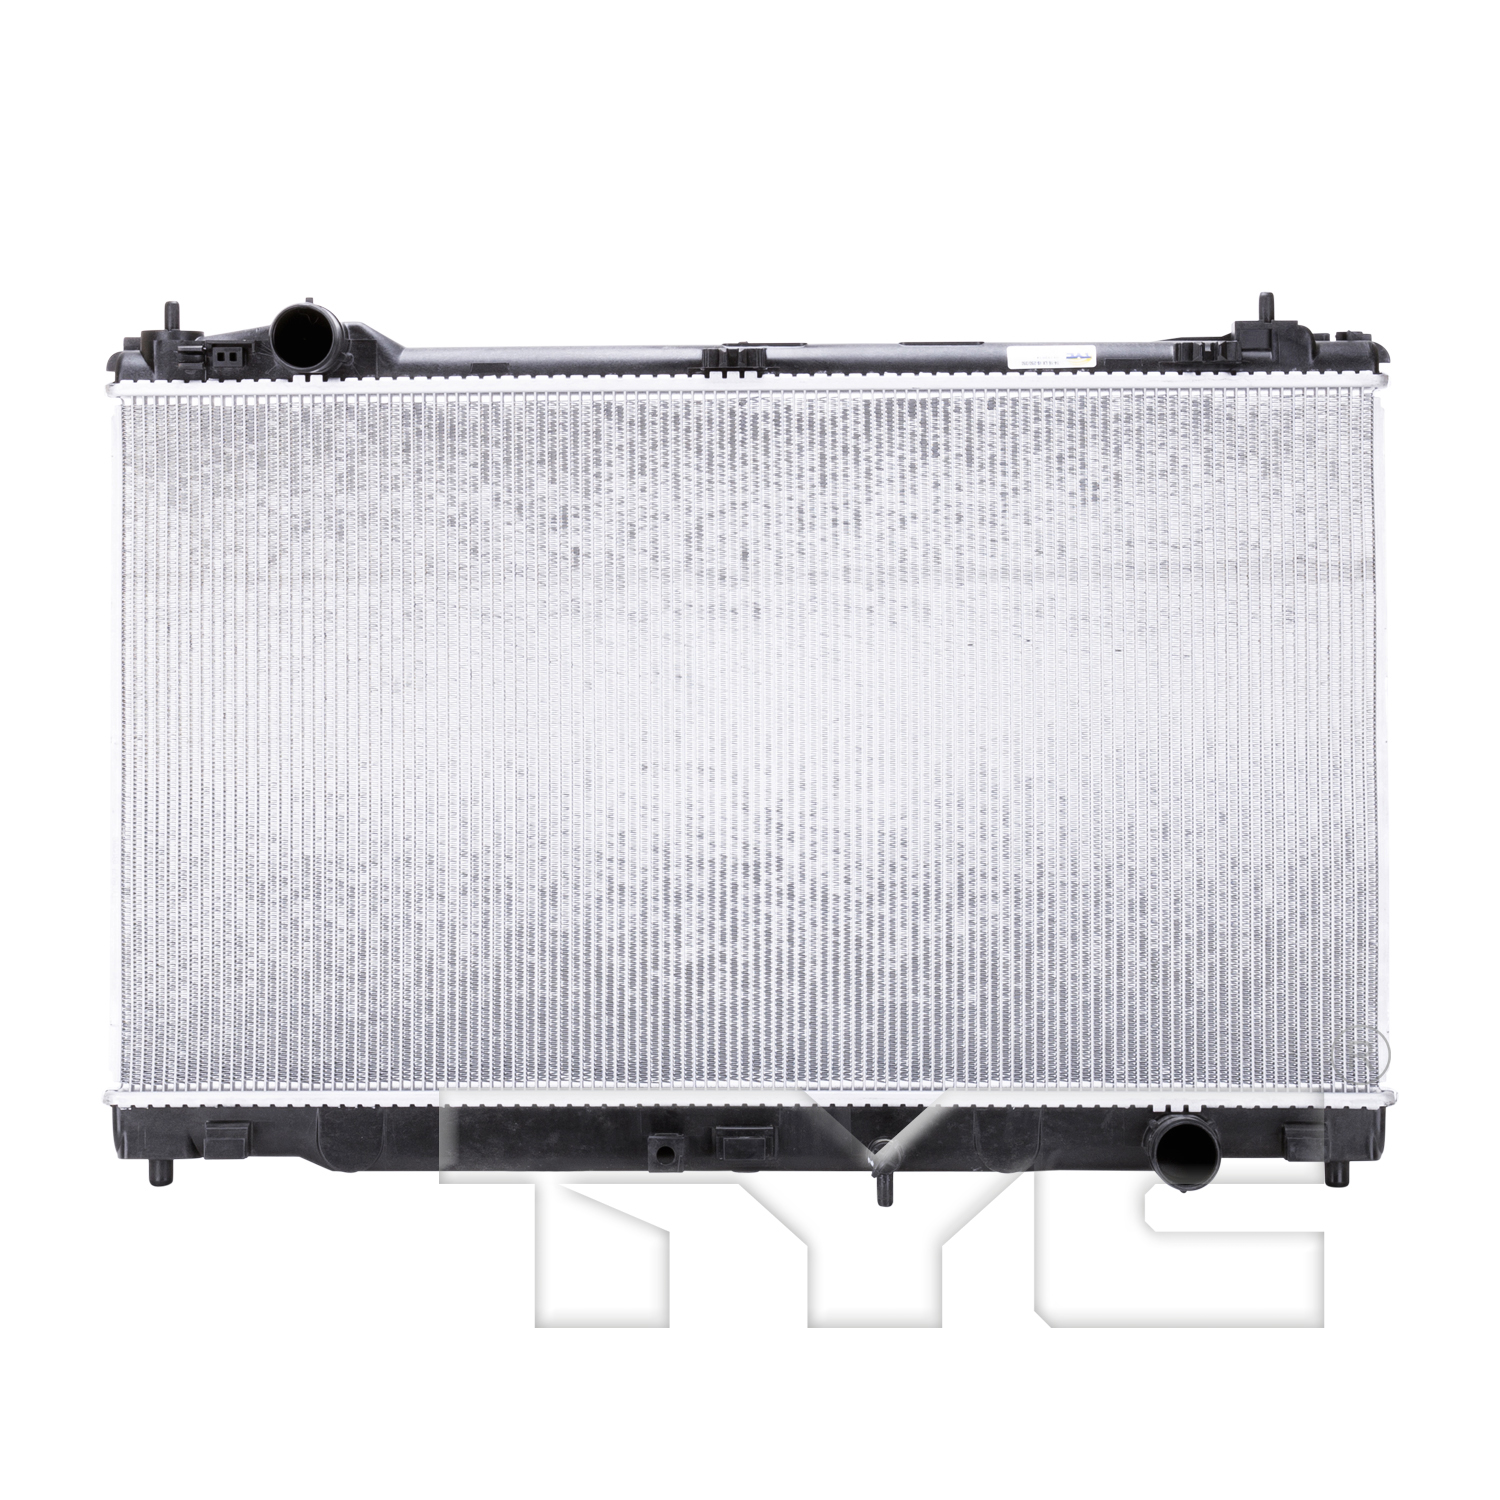 Aftermarket RADIATORS for LEXUS - IS250, IS250,14-15,Radiator assembly